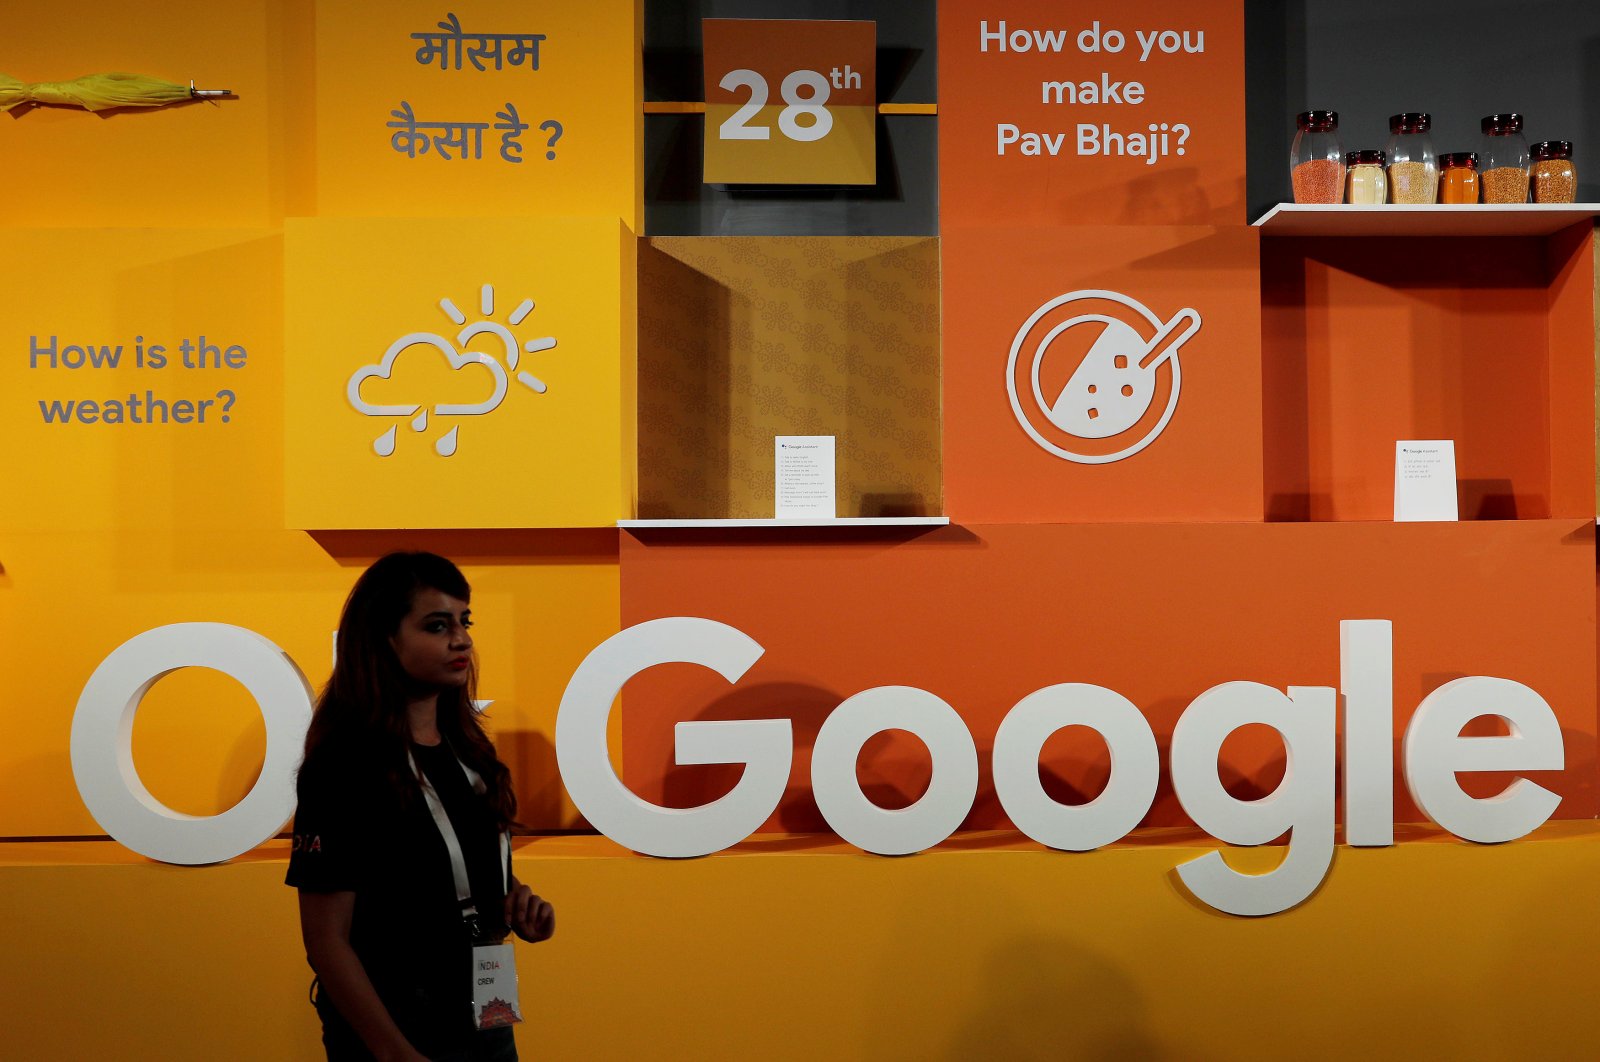 A woman walks past the logo of Google during an event in New Delhi, India, Aug. 28, 2018. (Reuters Photo)